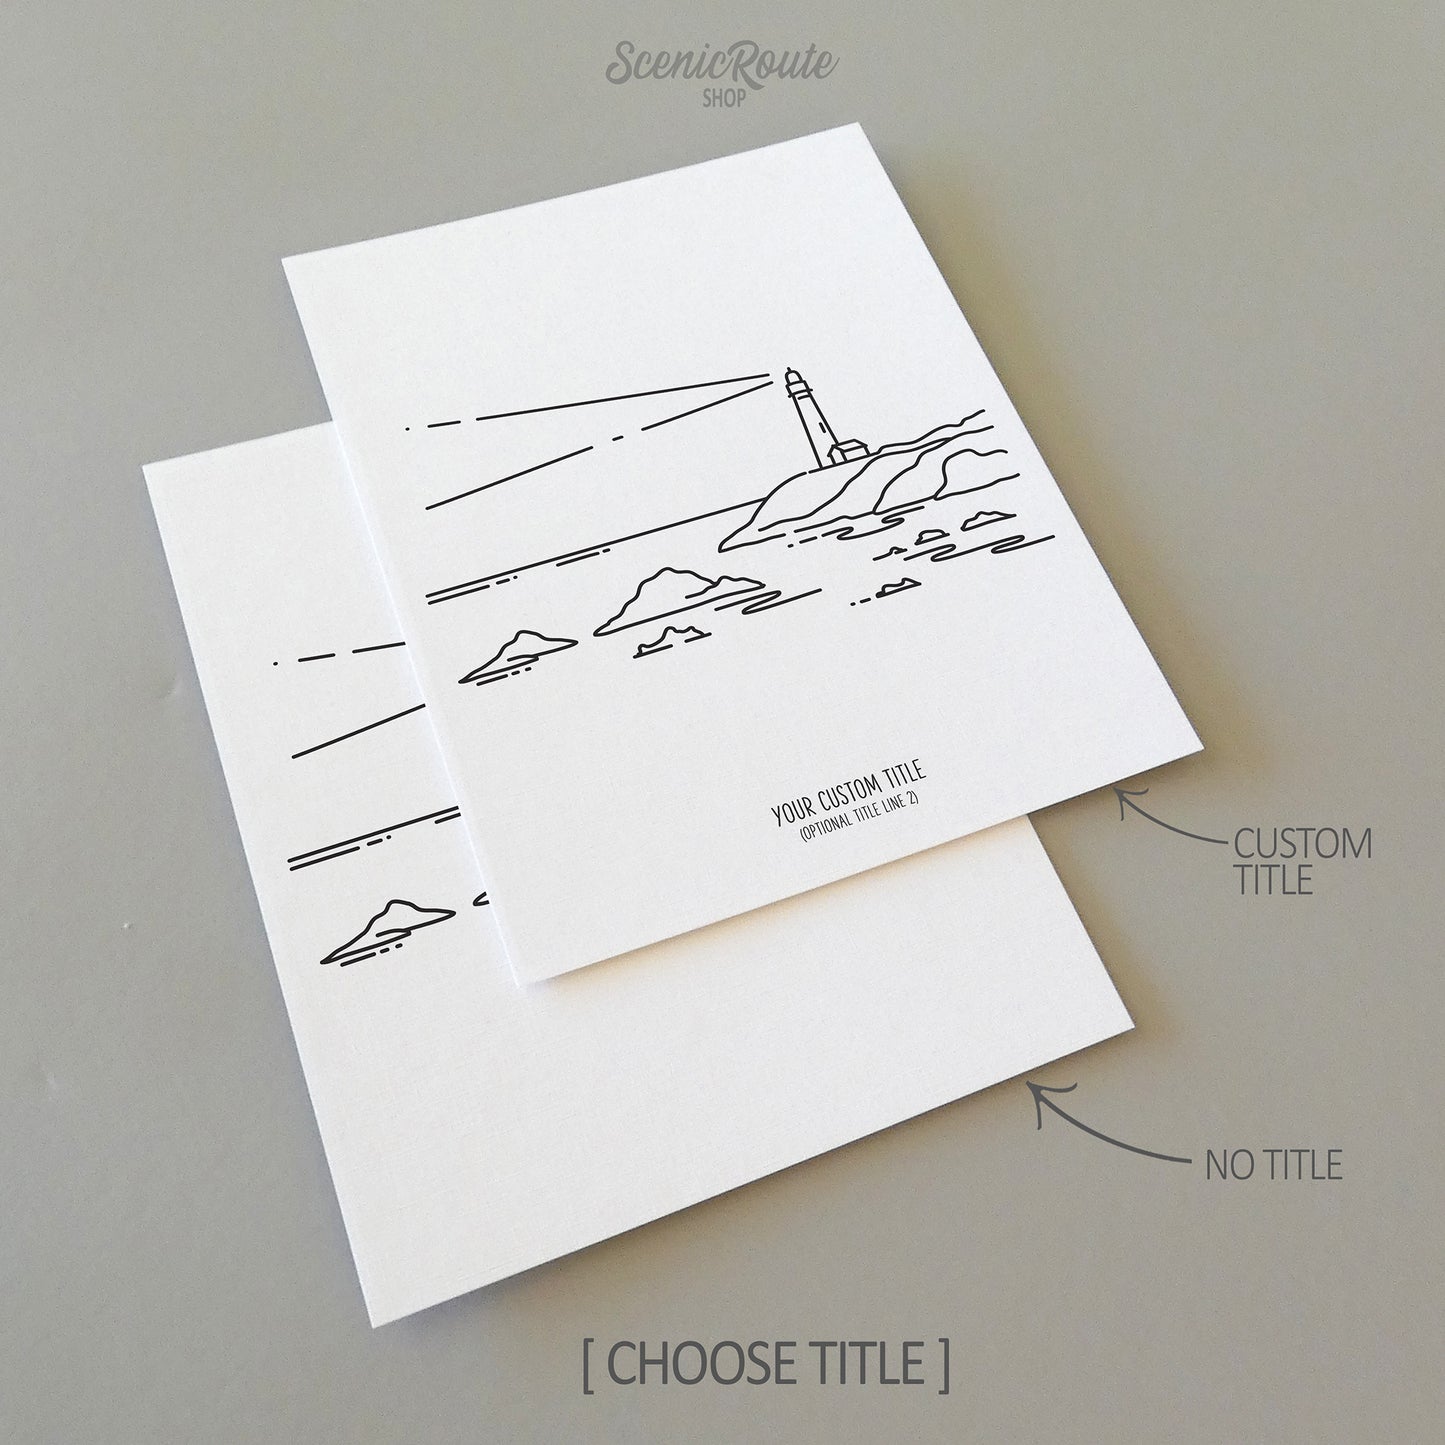 Two line art drawings of a lighthouse on a rocky coastline on white linen paper with a gray background.  The pieces are shown with “No Title” and “Custom Title” options for the available art print options.